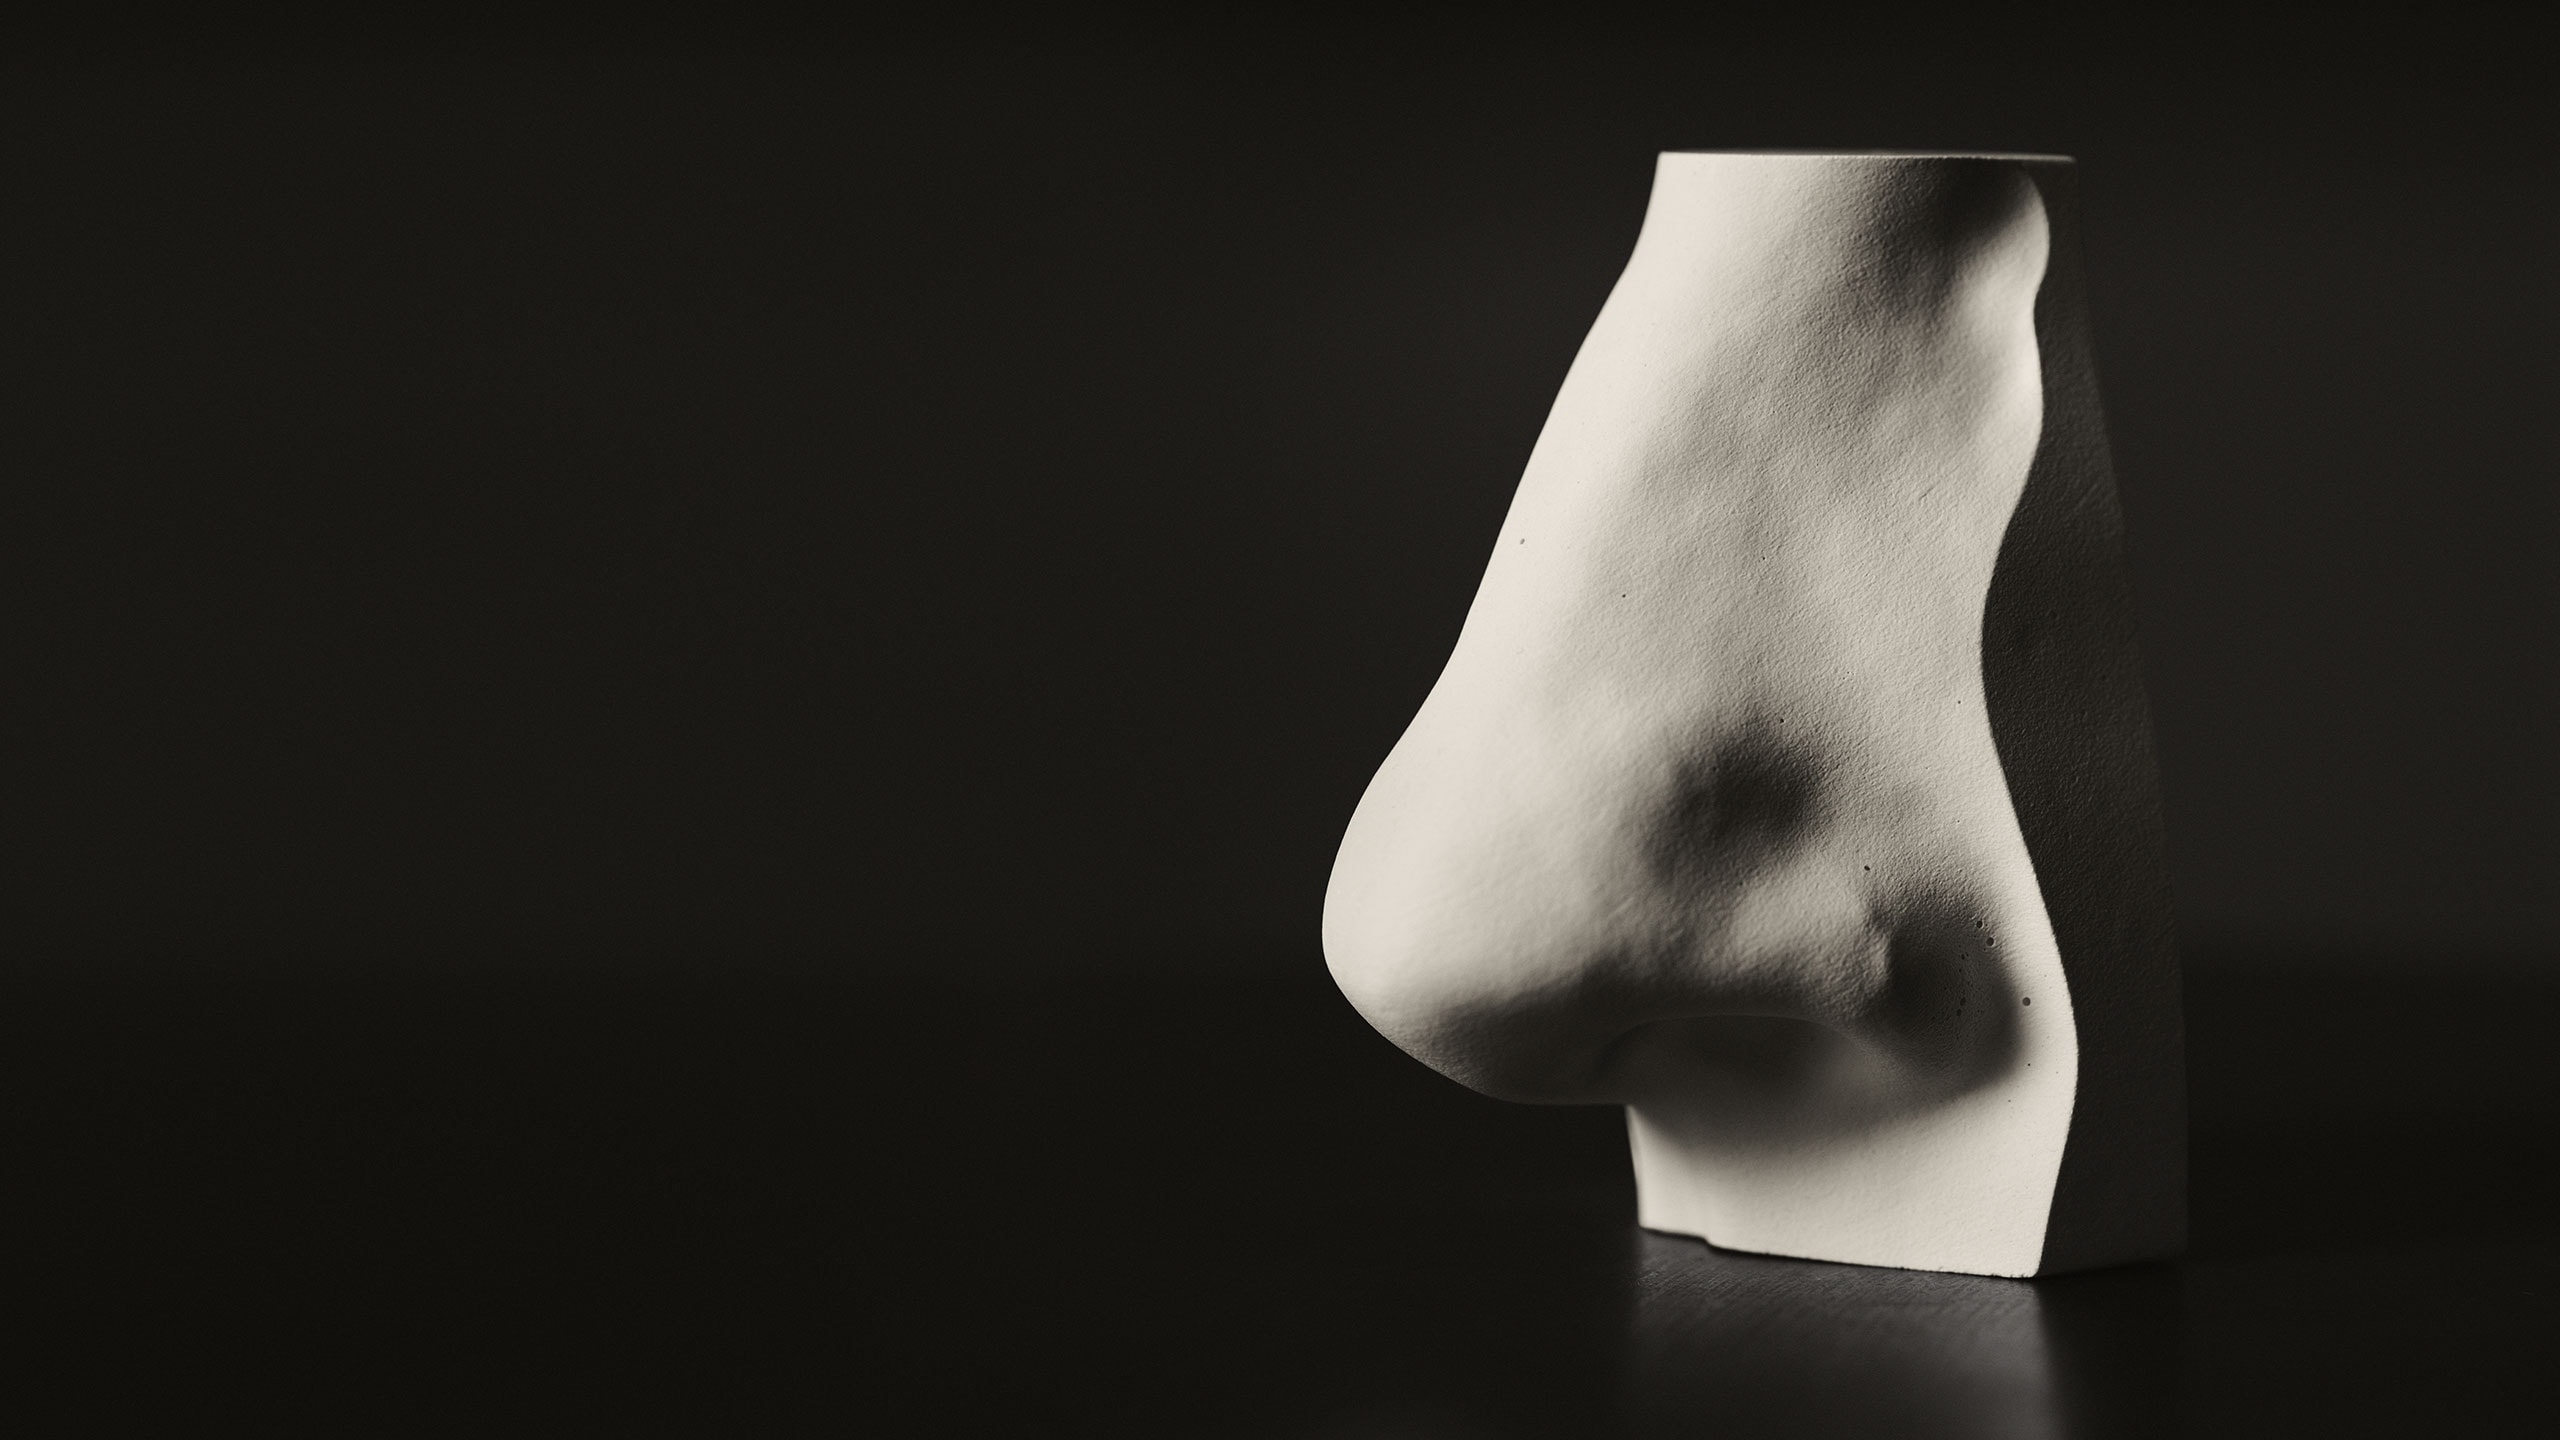 A nose sculpture placed in front of black background